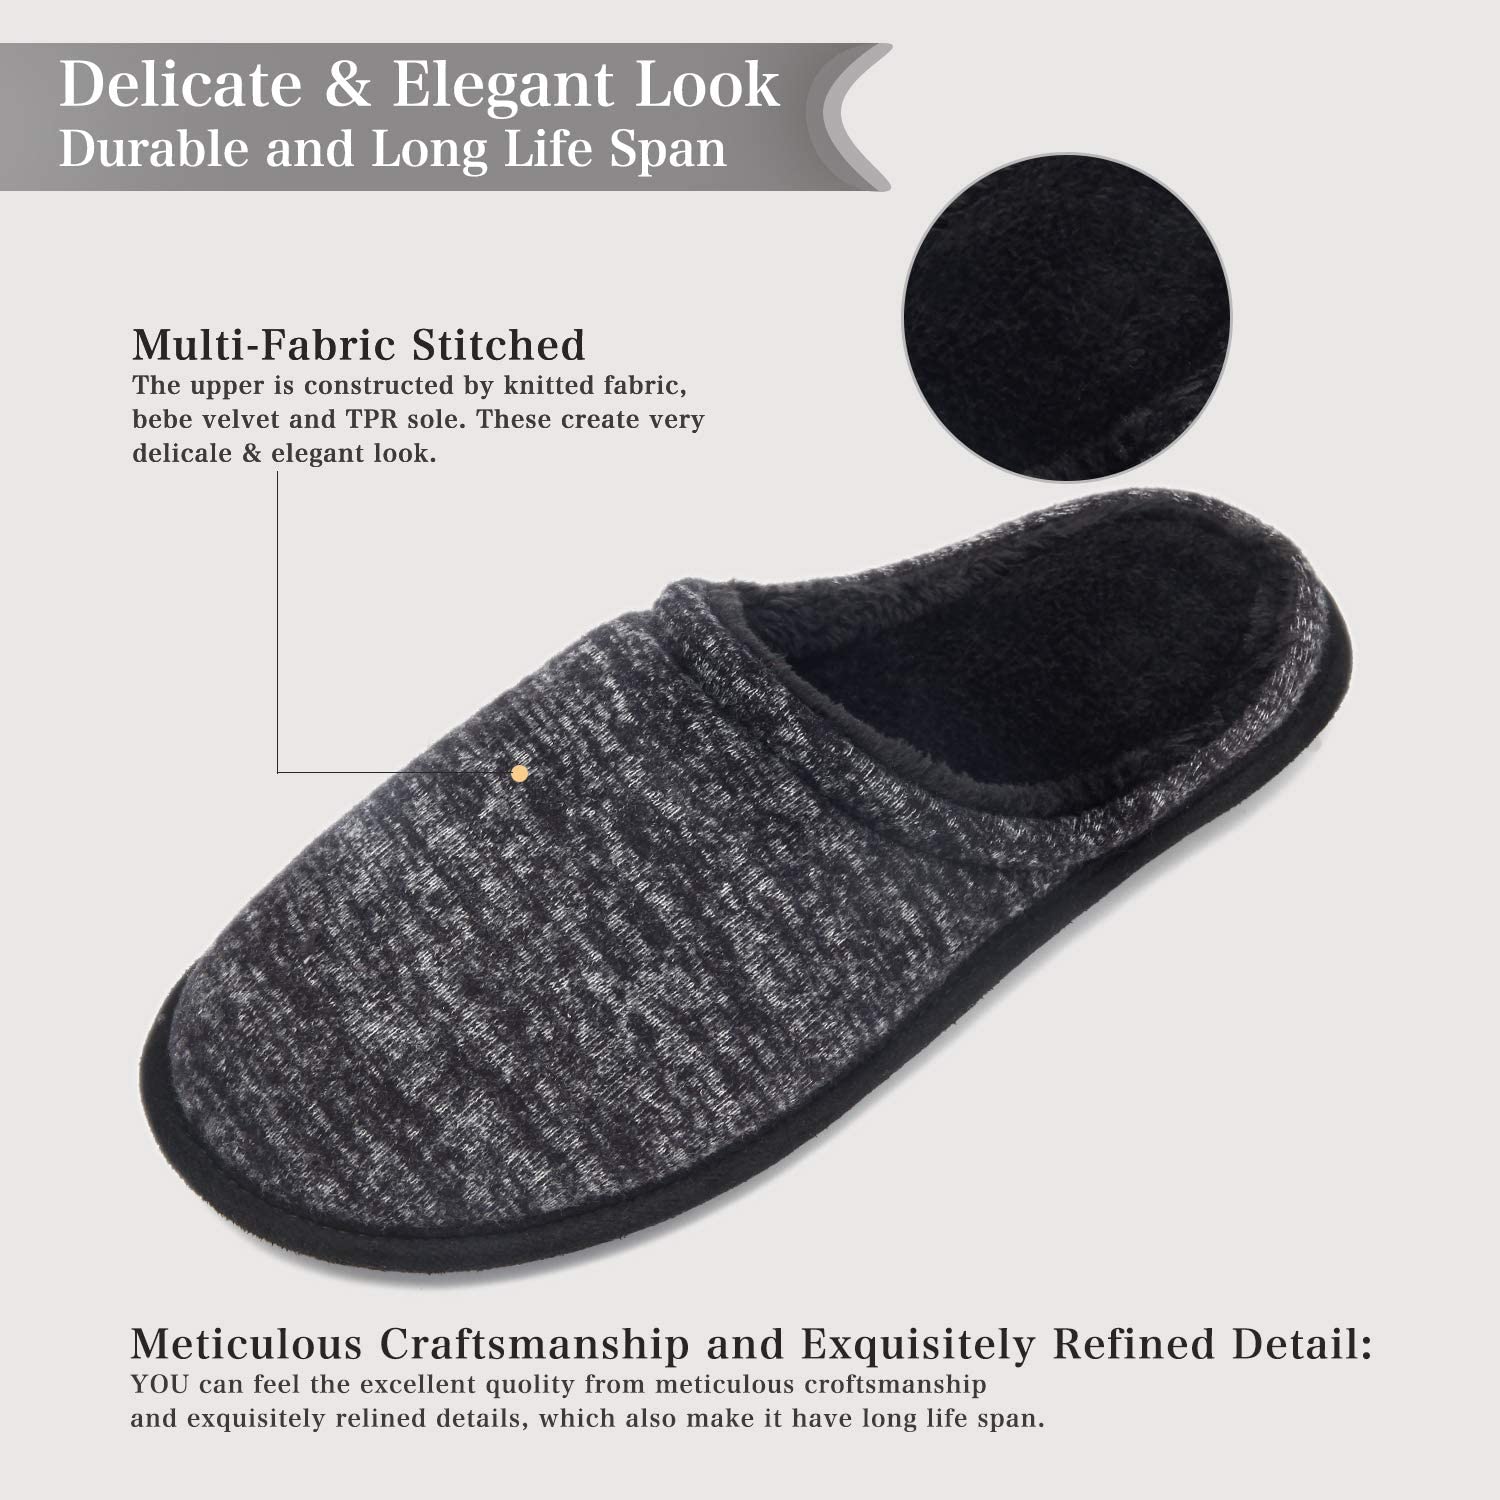 COZISO Slippers for Men Warm Memory Foam Slip on House Shoes Men Cotton Comfortable Knitted Fabric Home Indoor /& Outdoor Bedroom Shoes